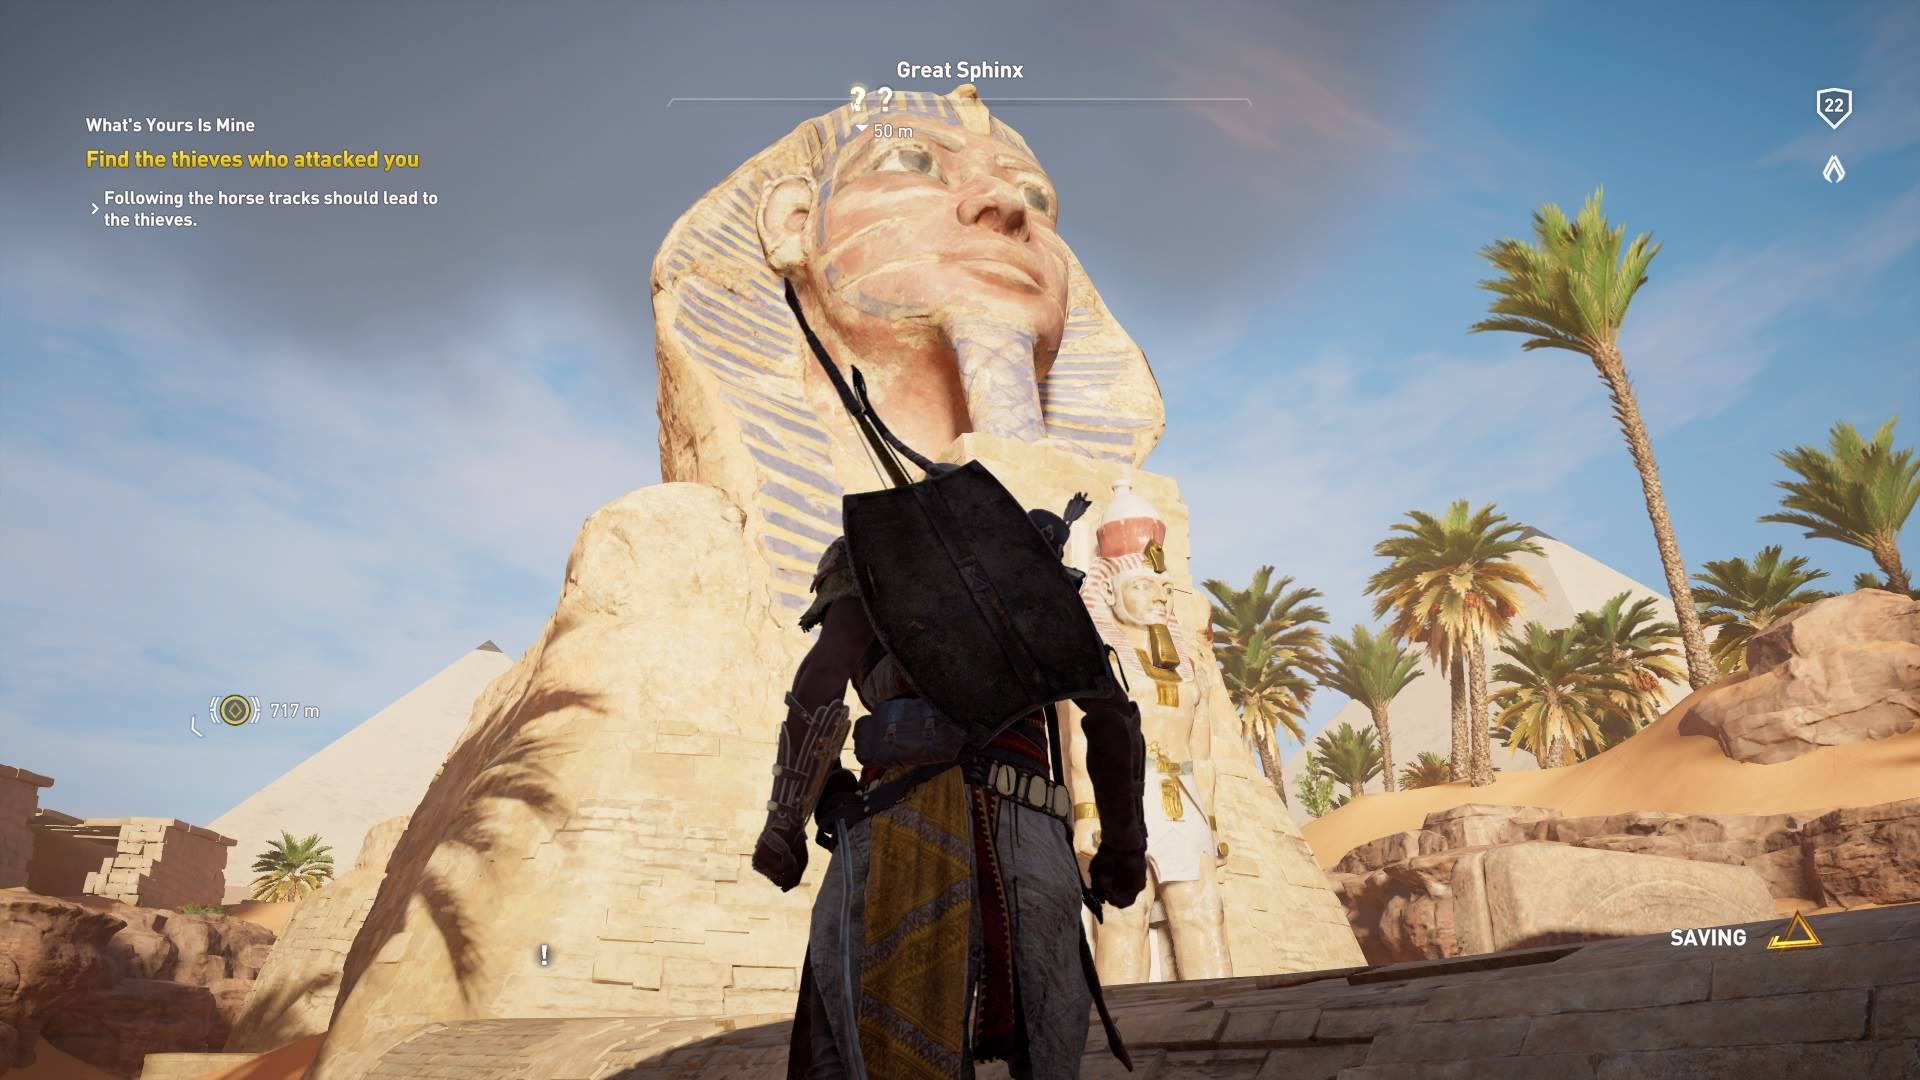 The Monkey Buddha: Game Review: Assassin's Creed Origins